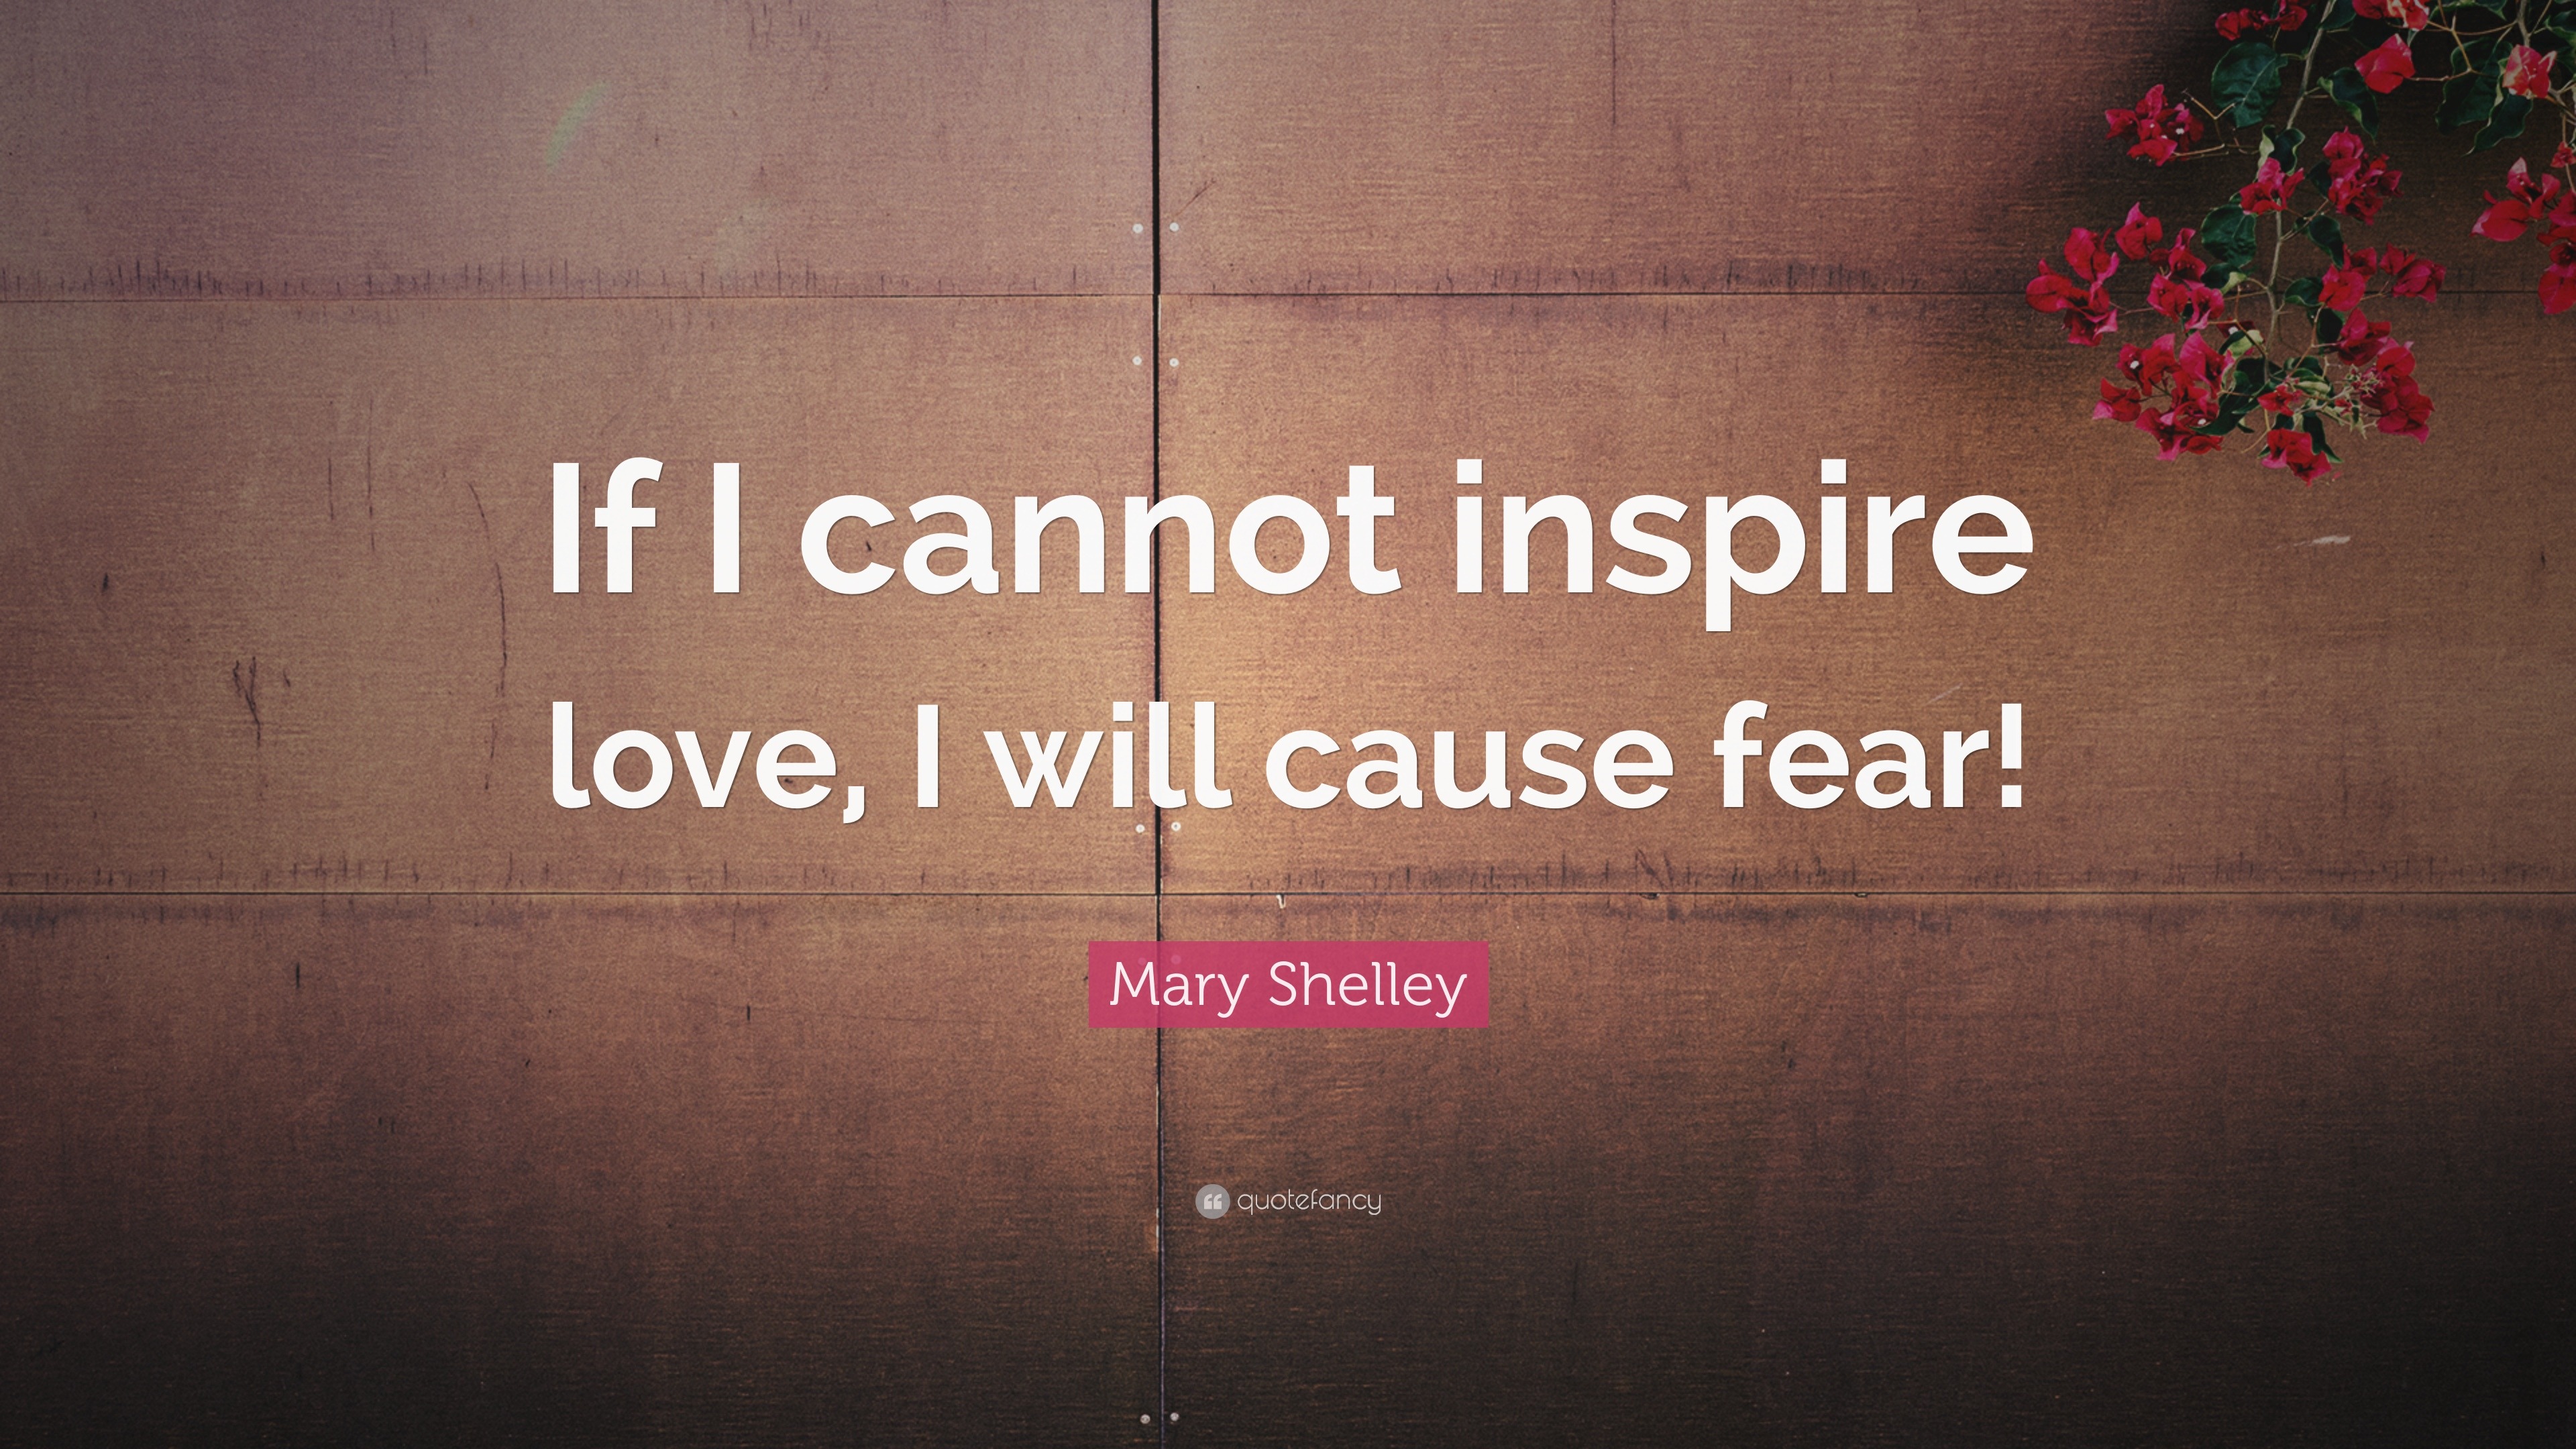 Mary Shelley Quote “If I cannot inspire love I will cause fear